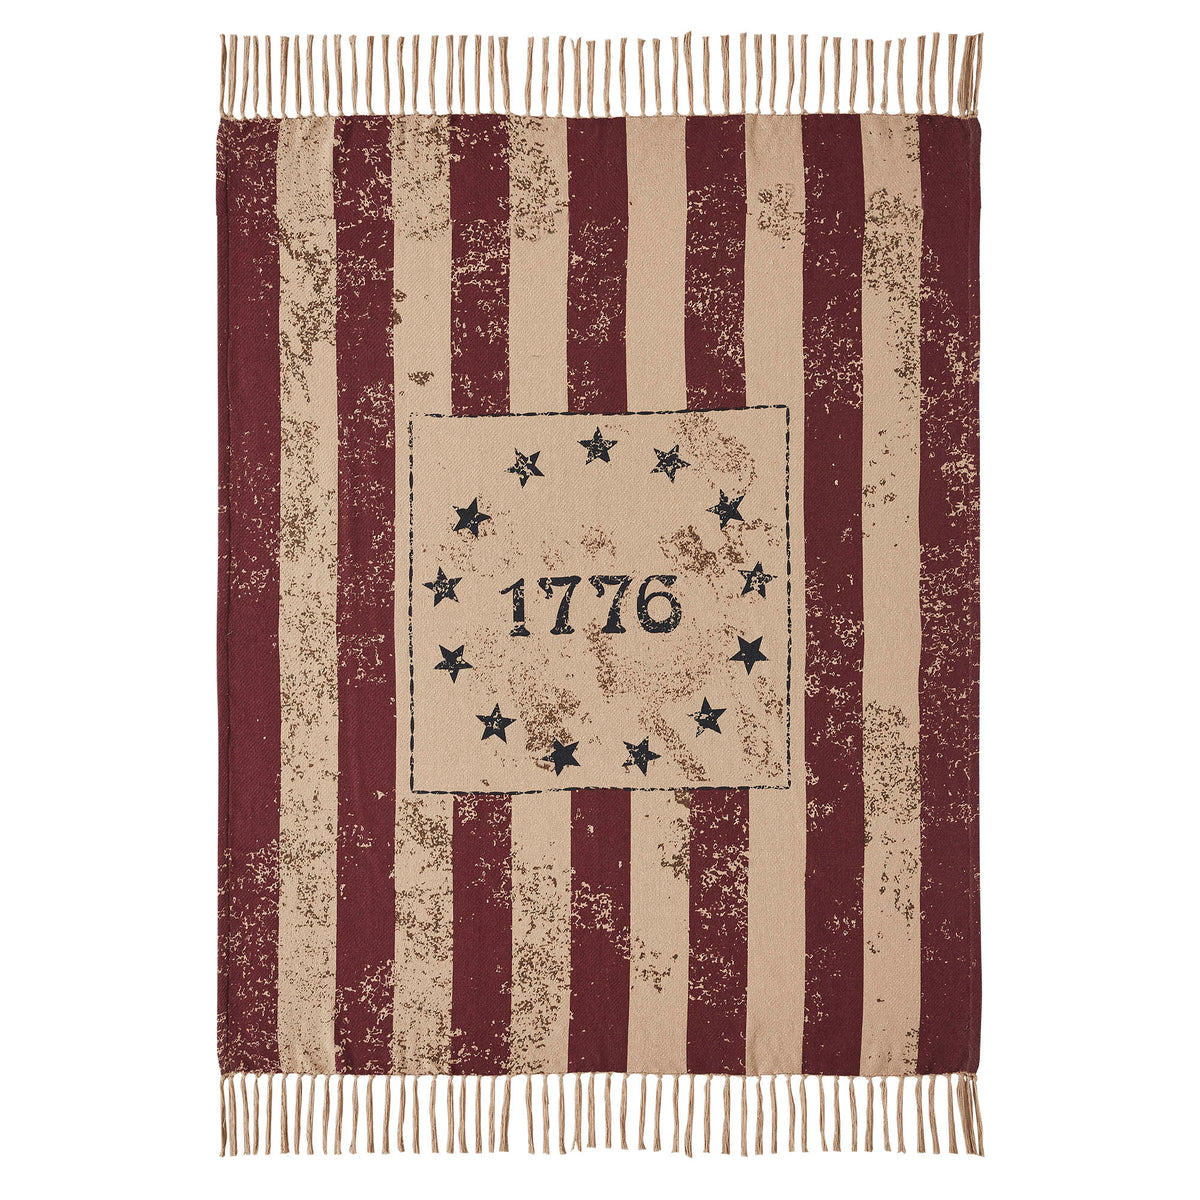 My Country 1776 Woven Throw 50x60